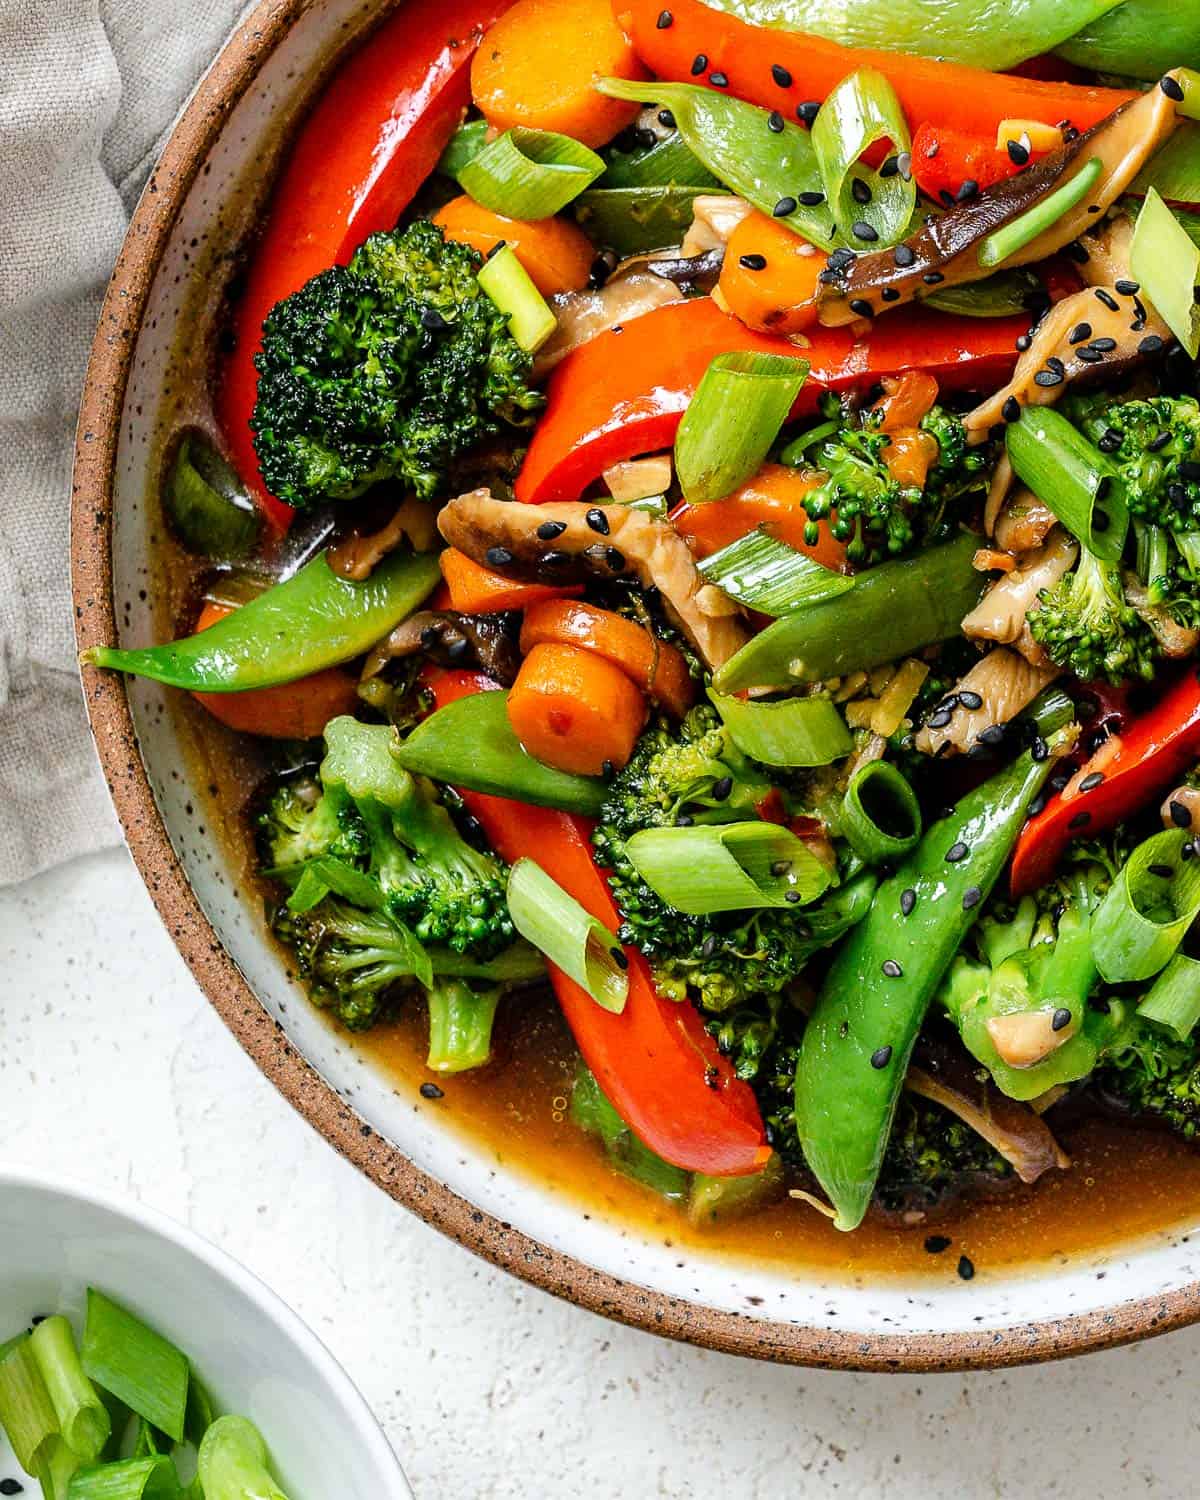 completed Easy Stir-Fry Vegetables in a bowl a،nst a light background